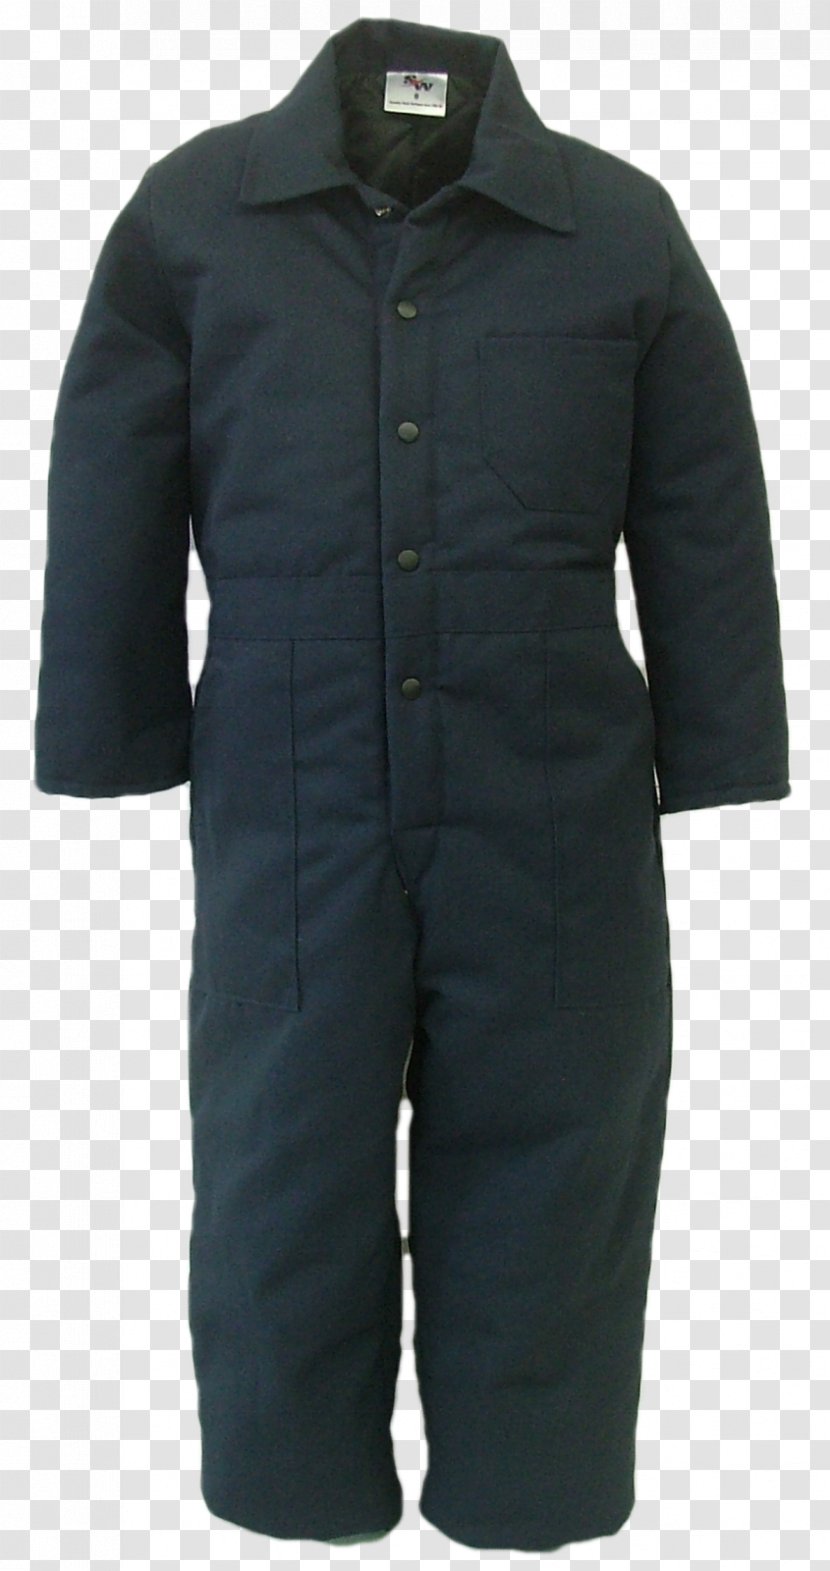 Sleeve Coat Overall Jacket Lining Transparent PNG